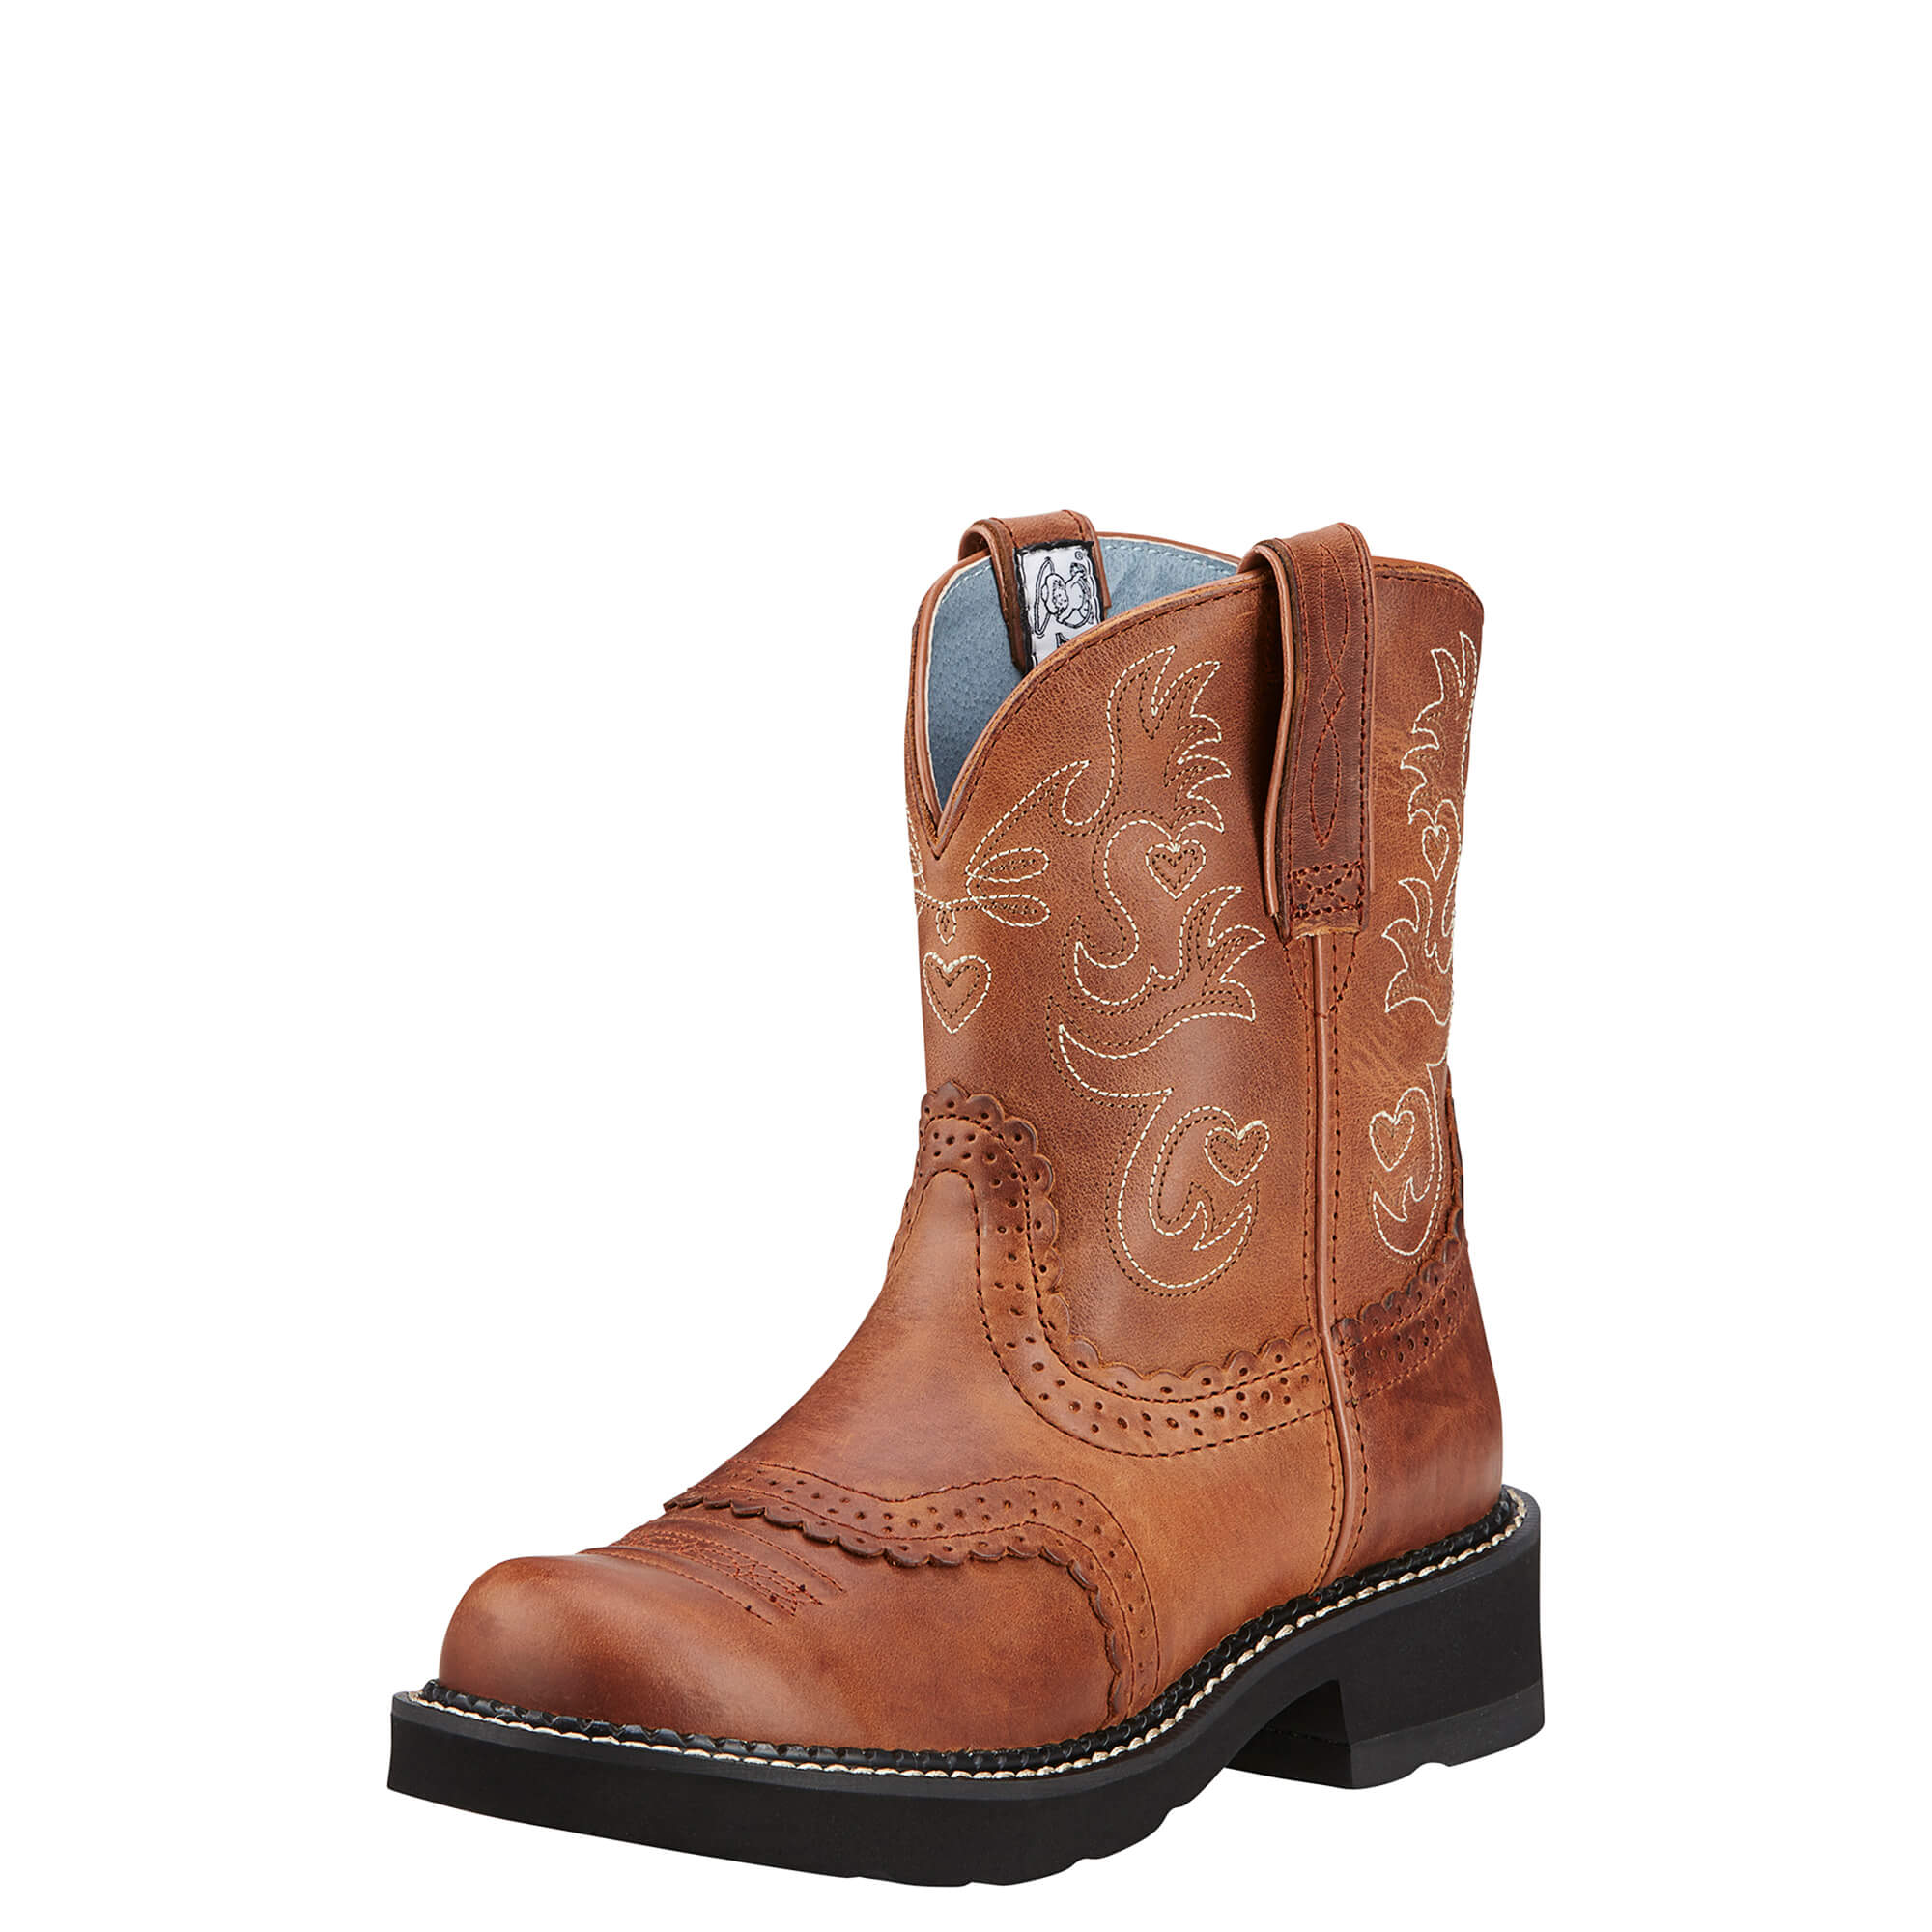 Are Ariat Fat Baby Boots Good for Riding?